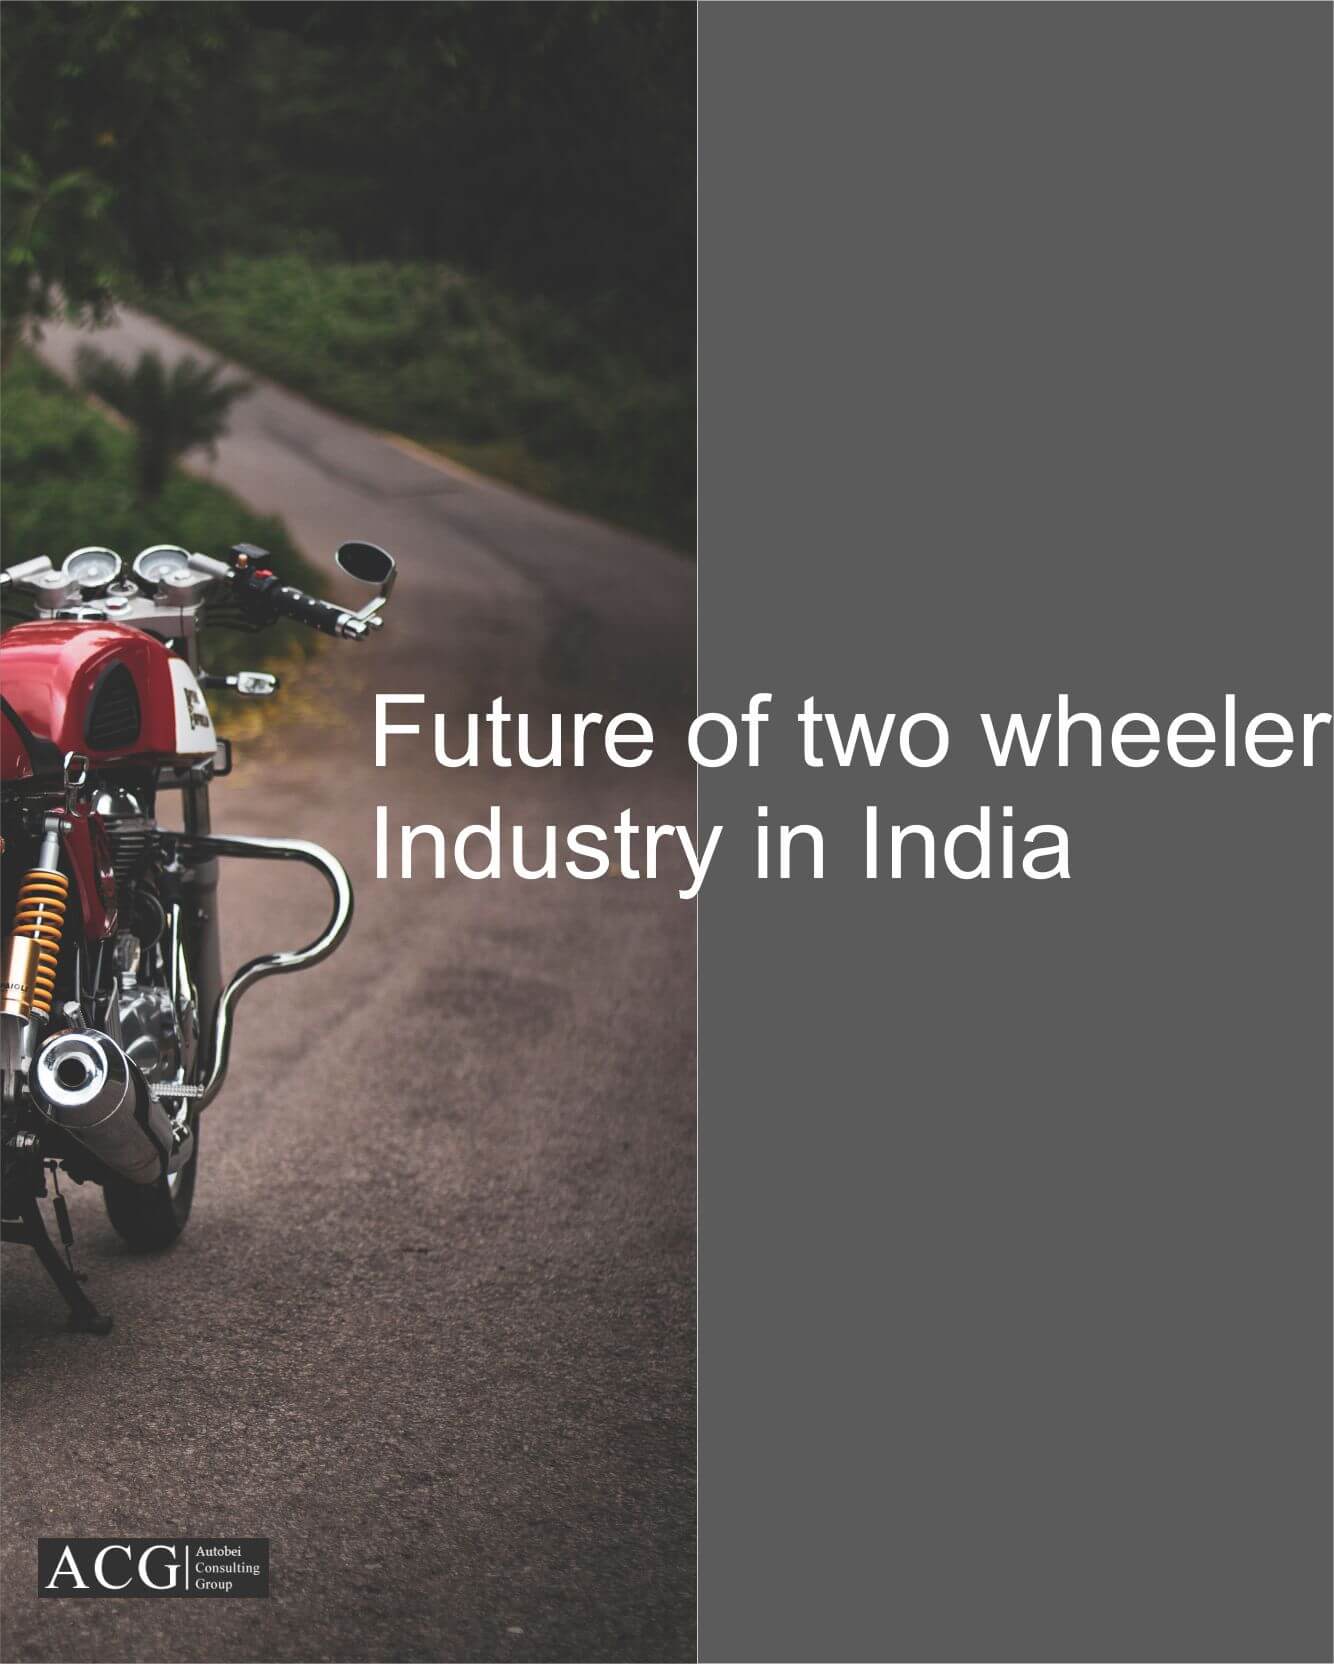 Future of two wheeler Industry in India